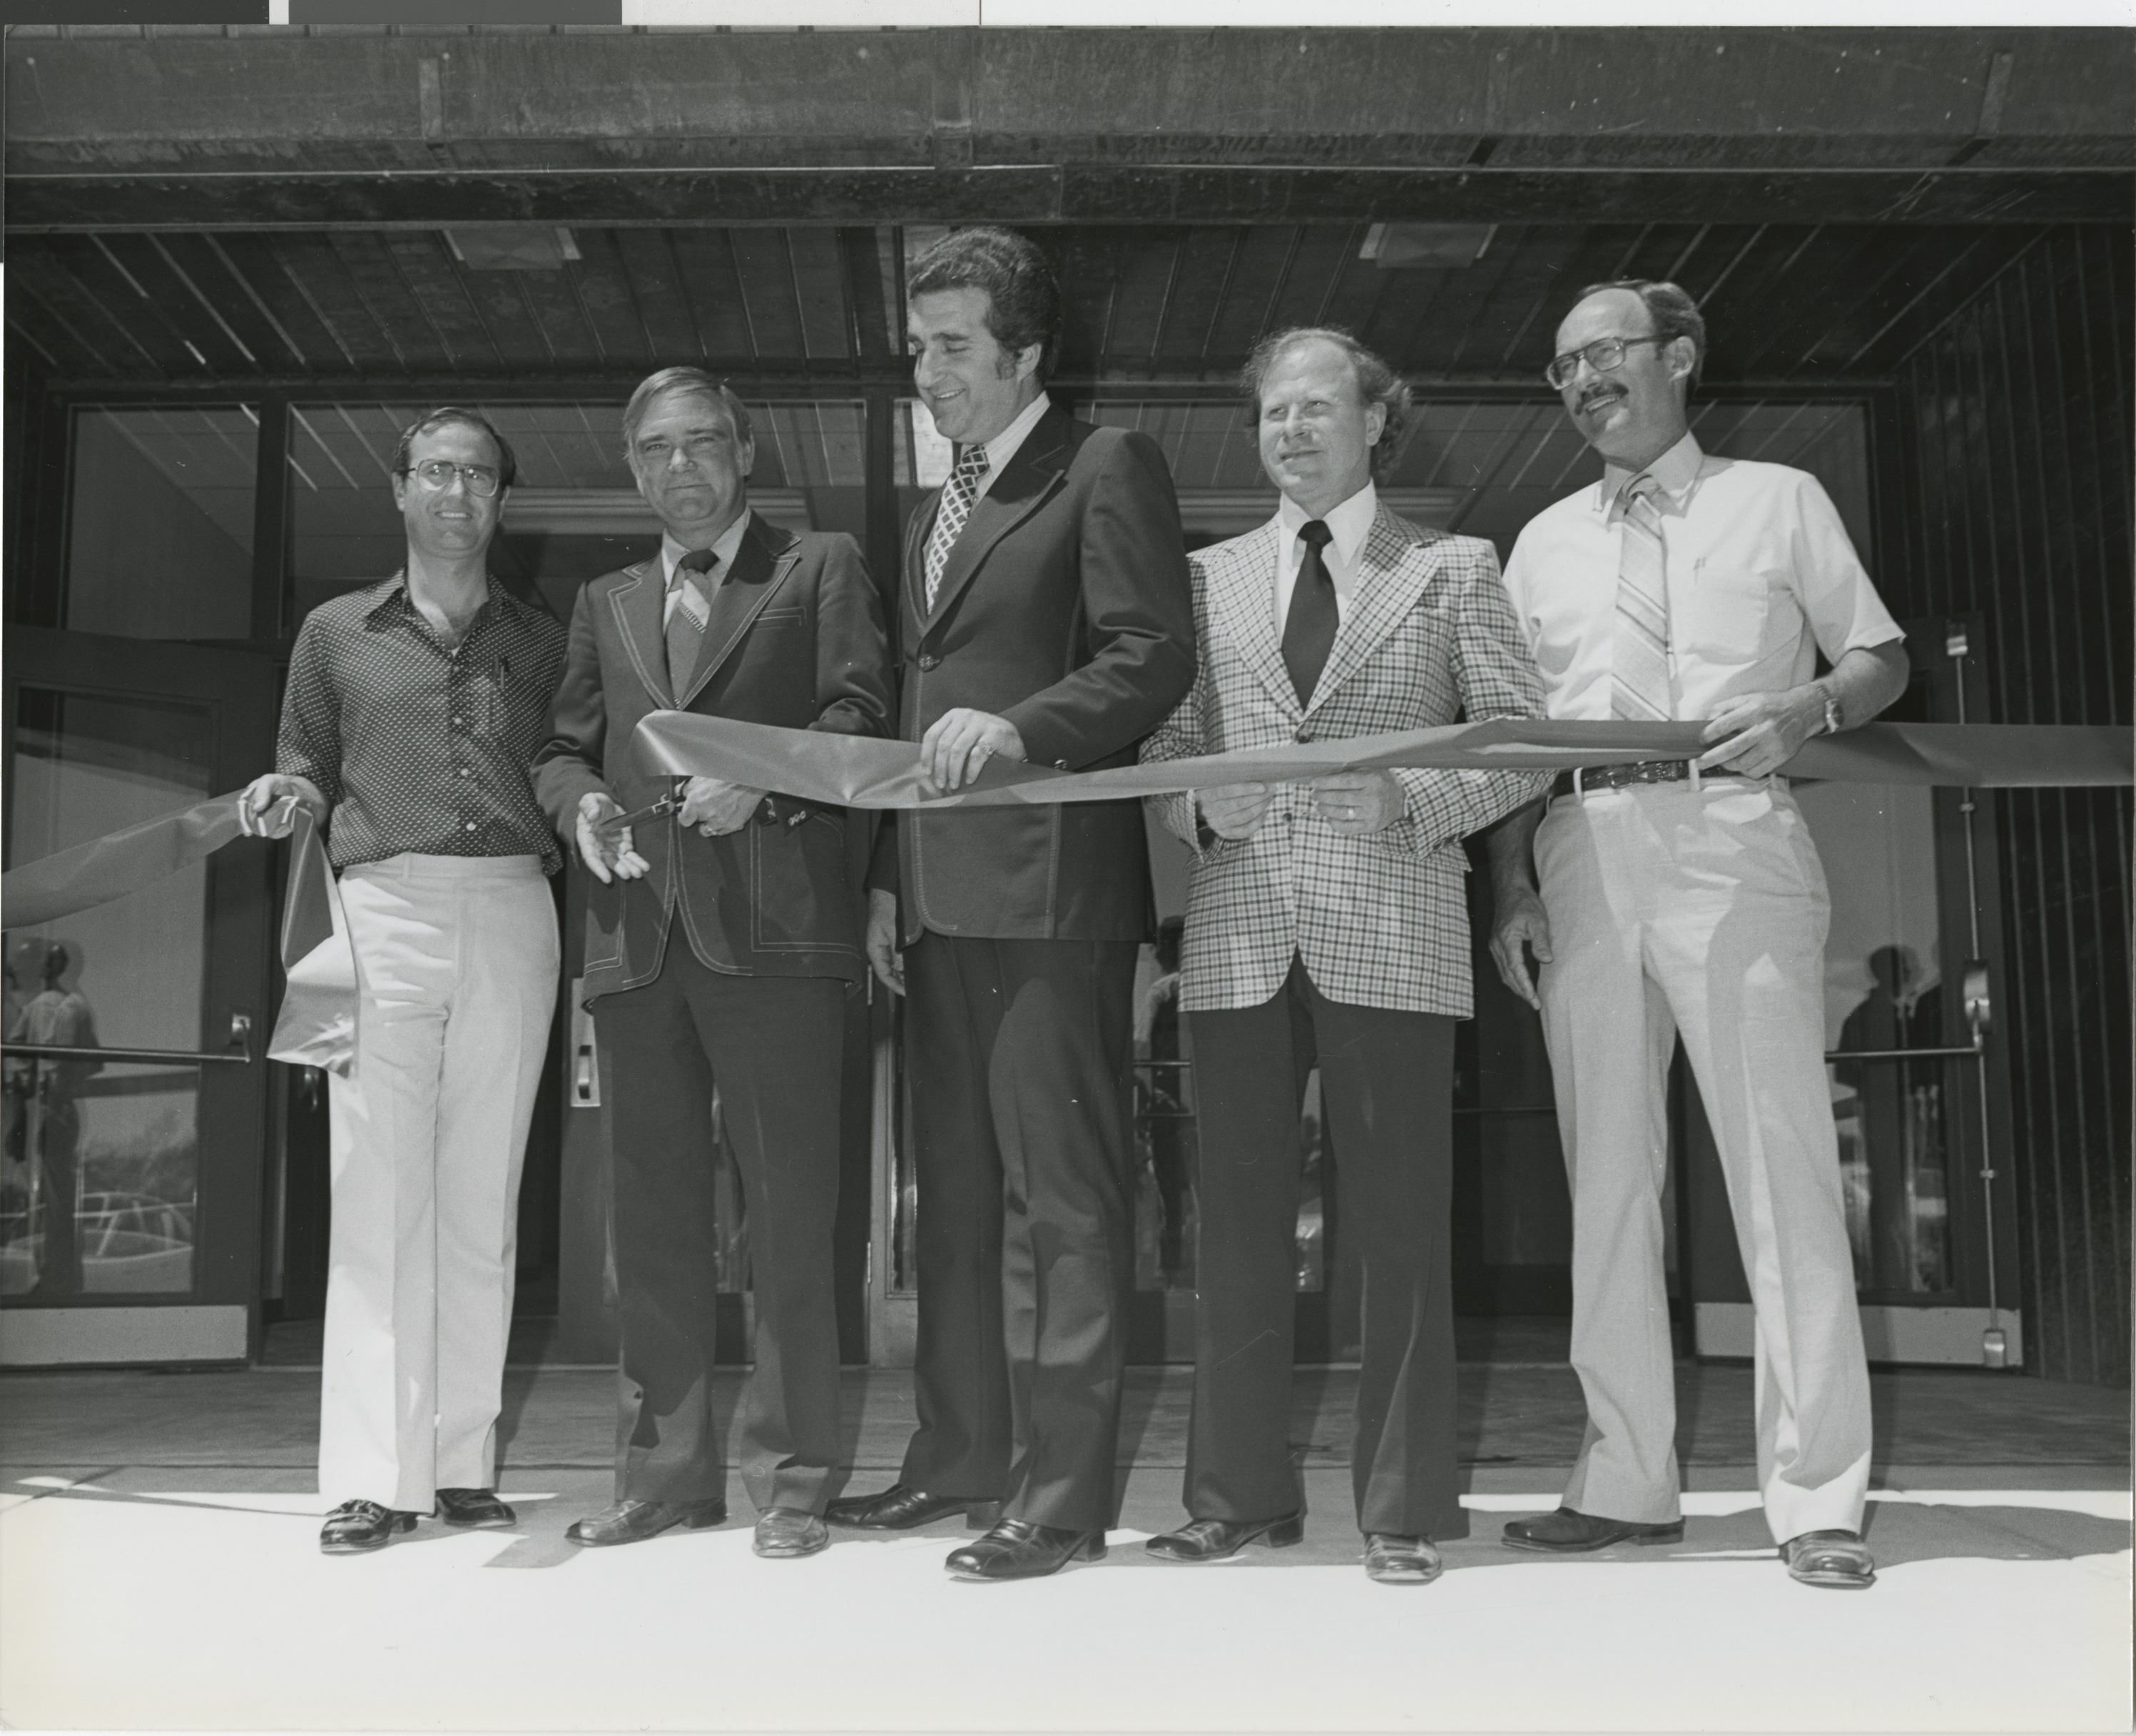 Photograph of Ron Lurie (center) at a ribbon cutting